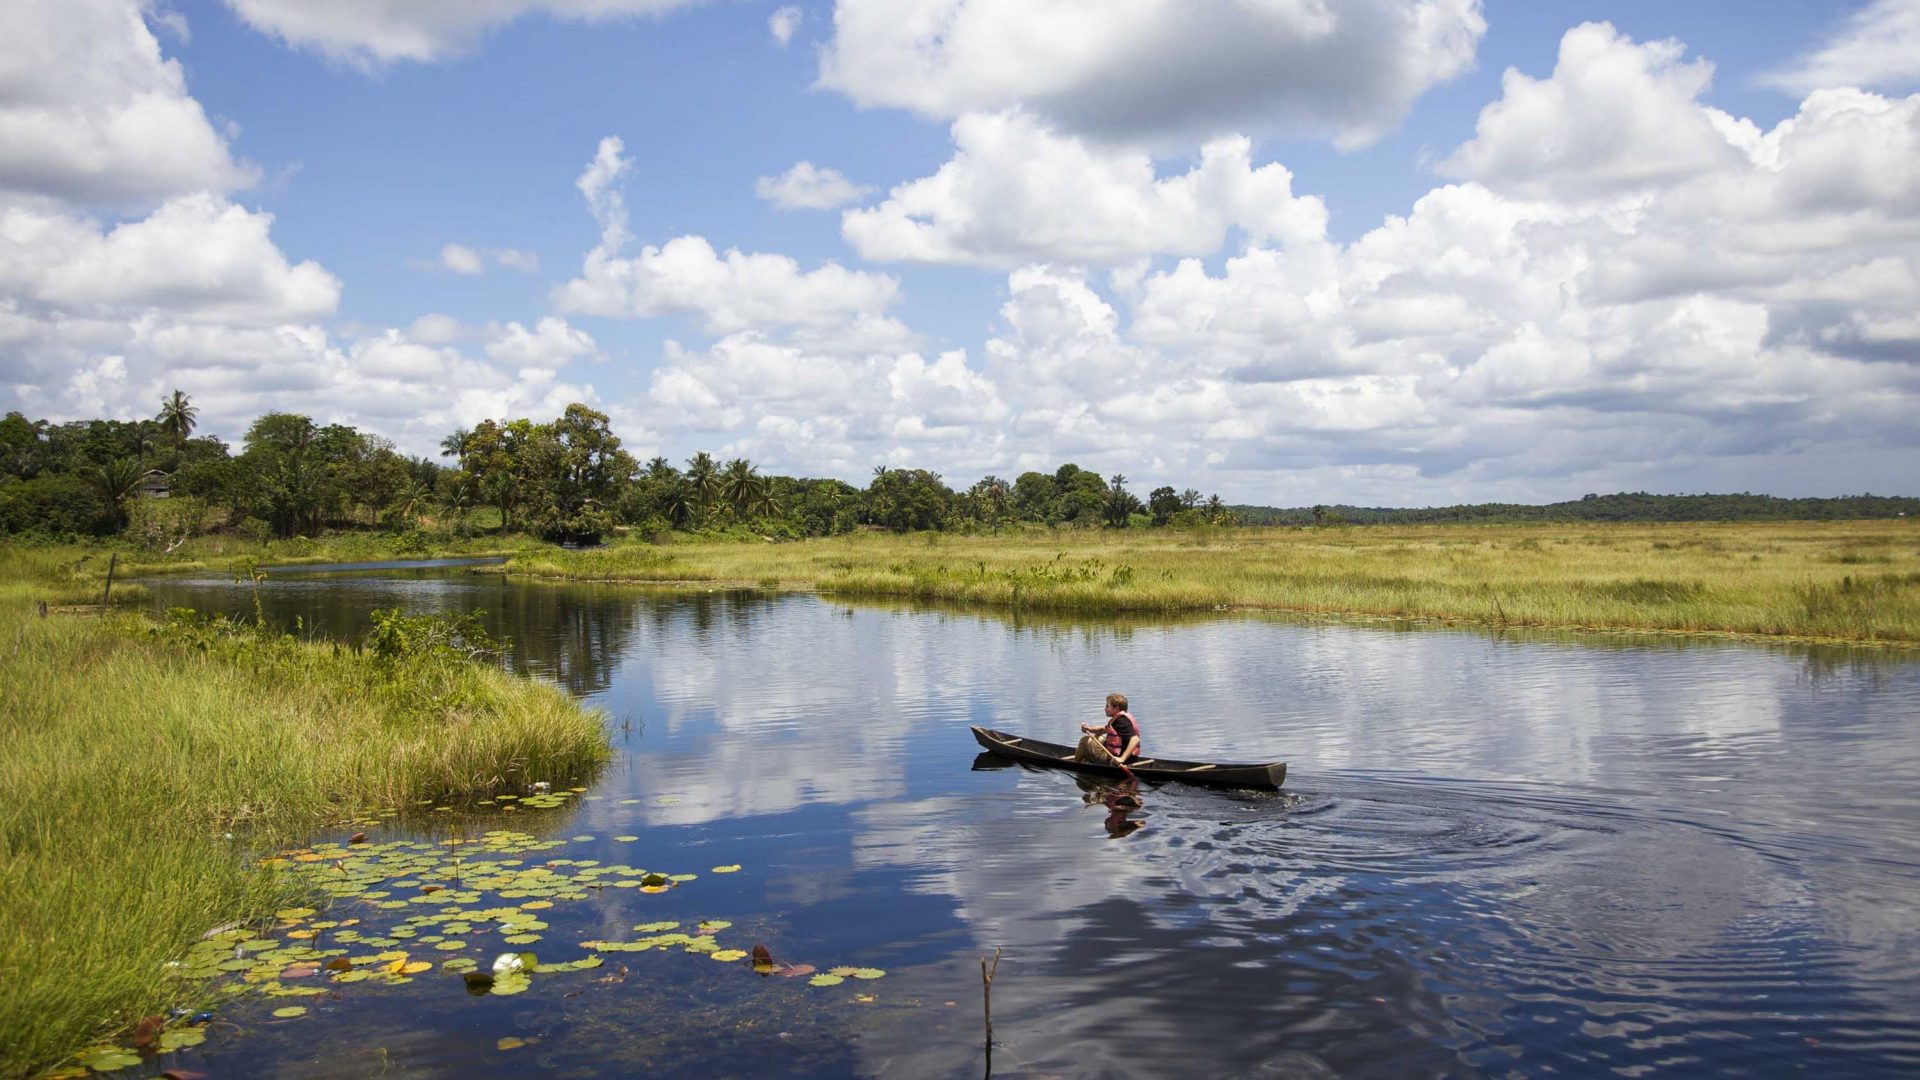 As the oil flows, can Guyana continue to be a beacon of sustainable tourism?